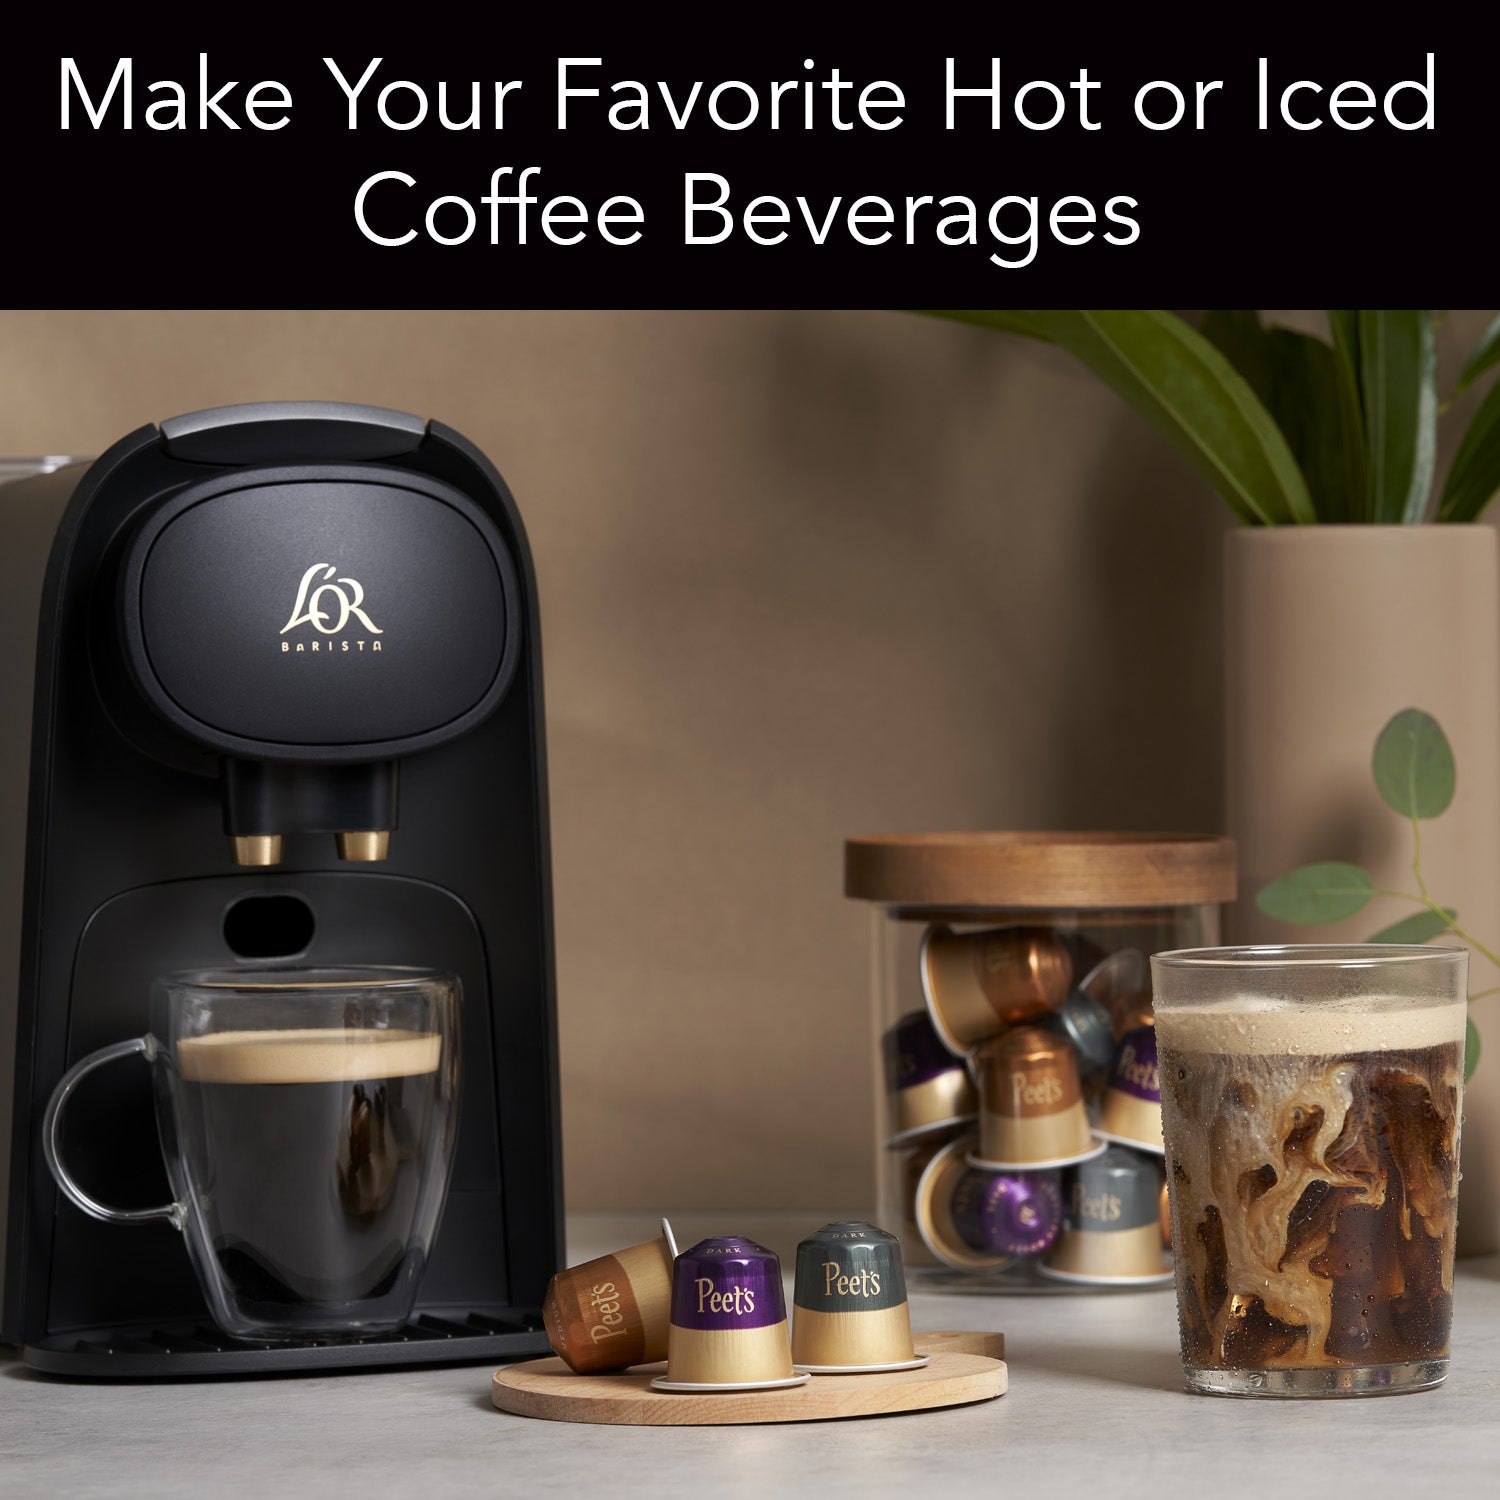 Image of L'OR BARISTA System with Peet's capsules and coffee drink